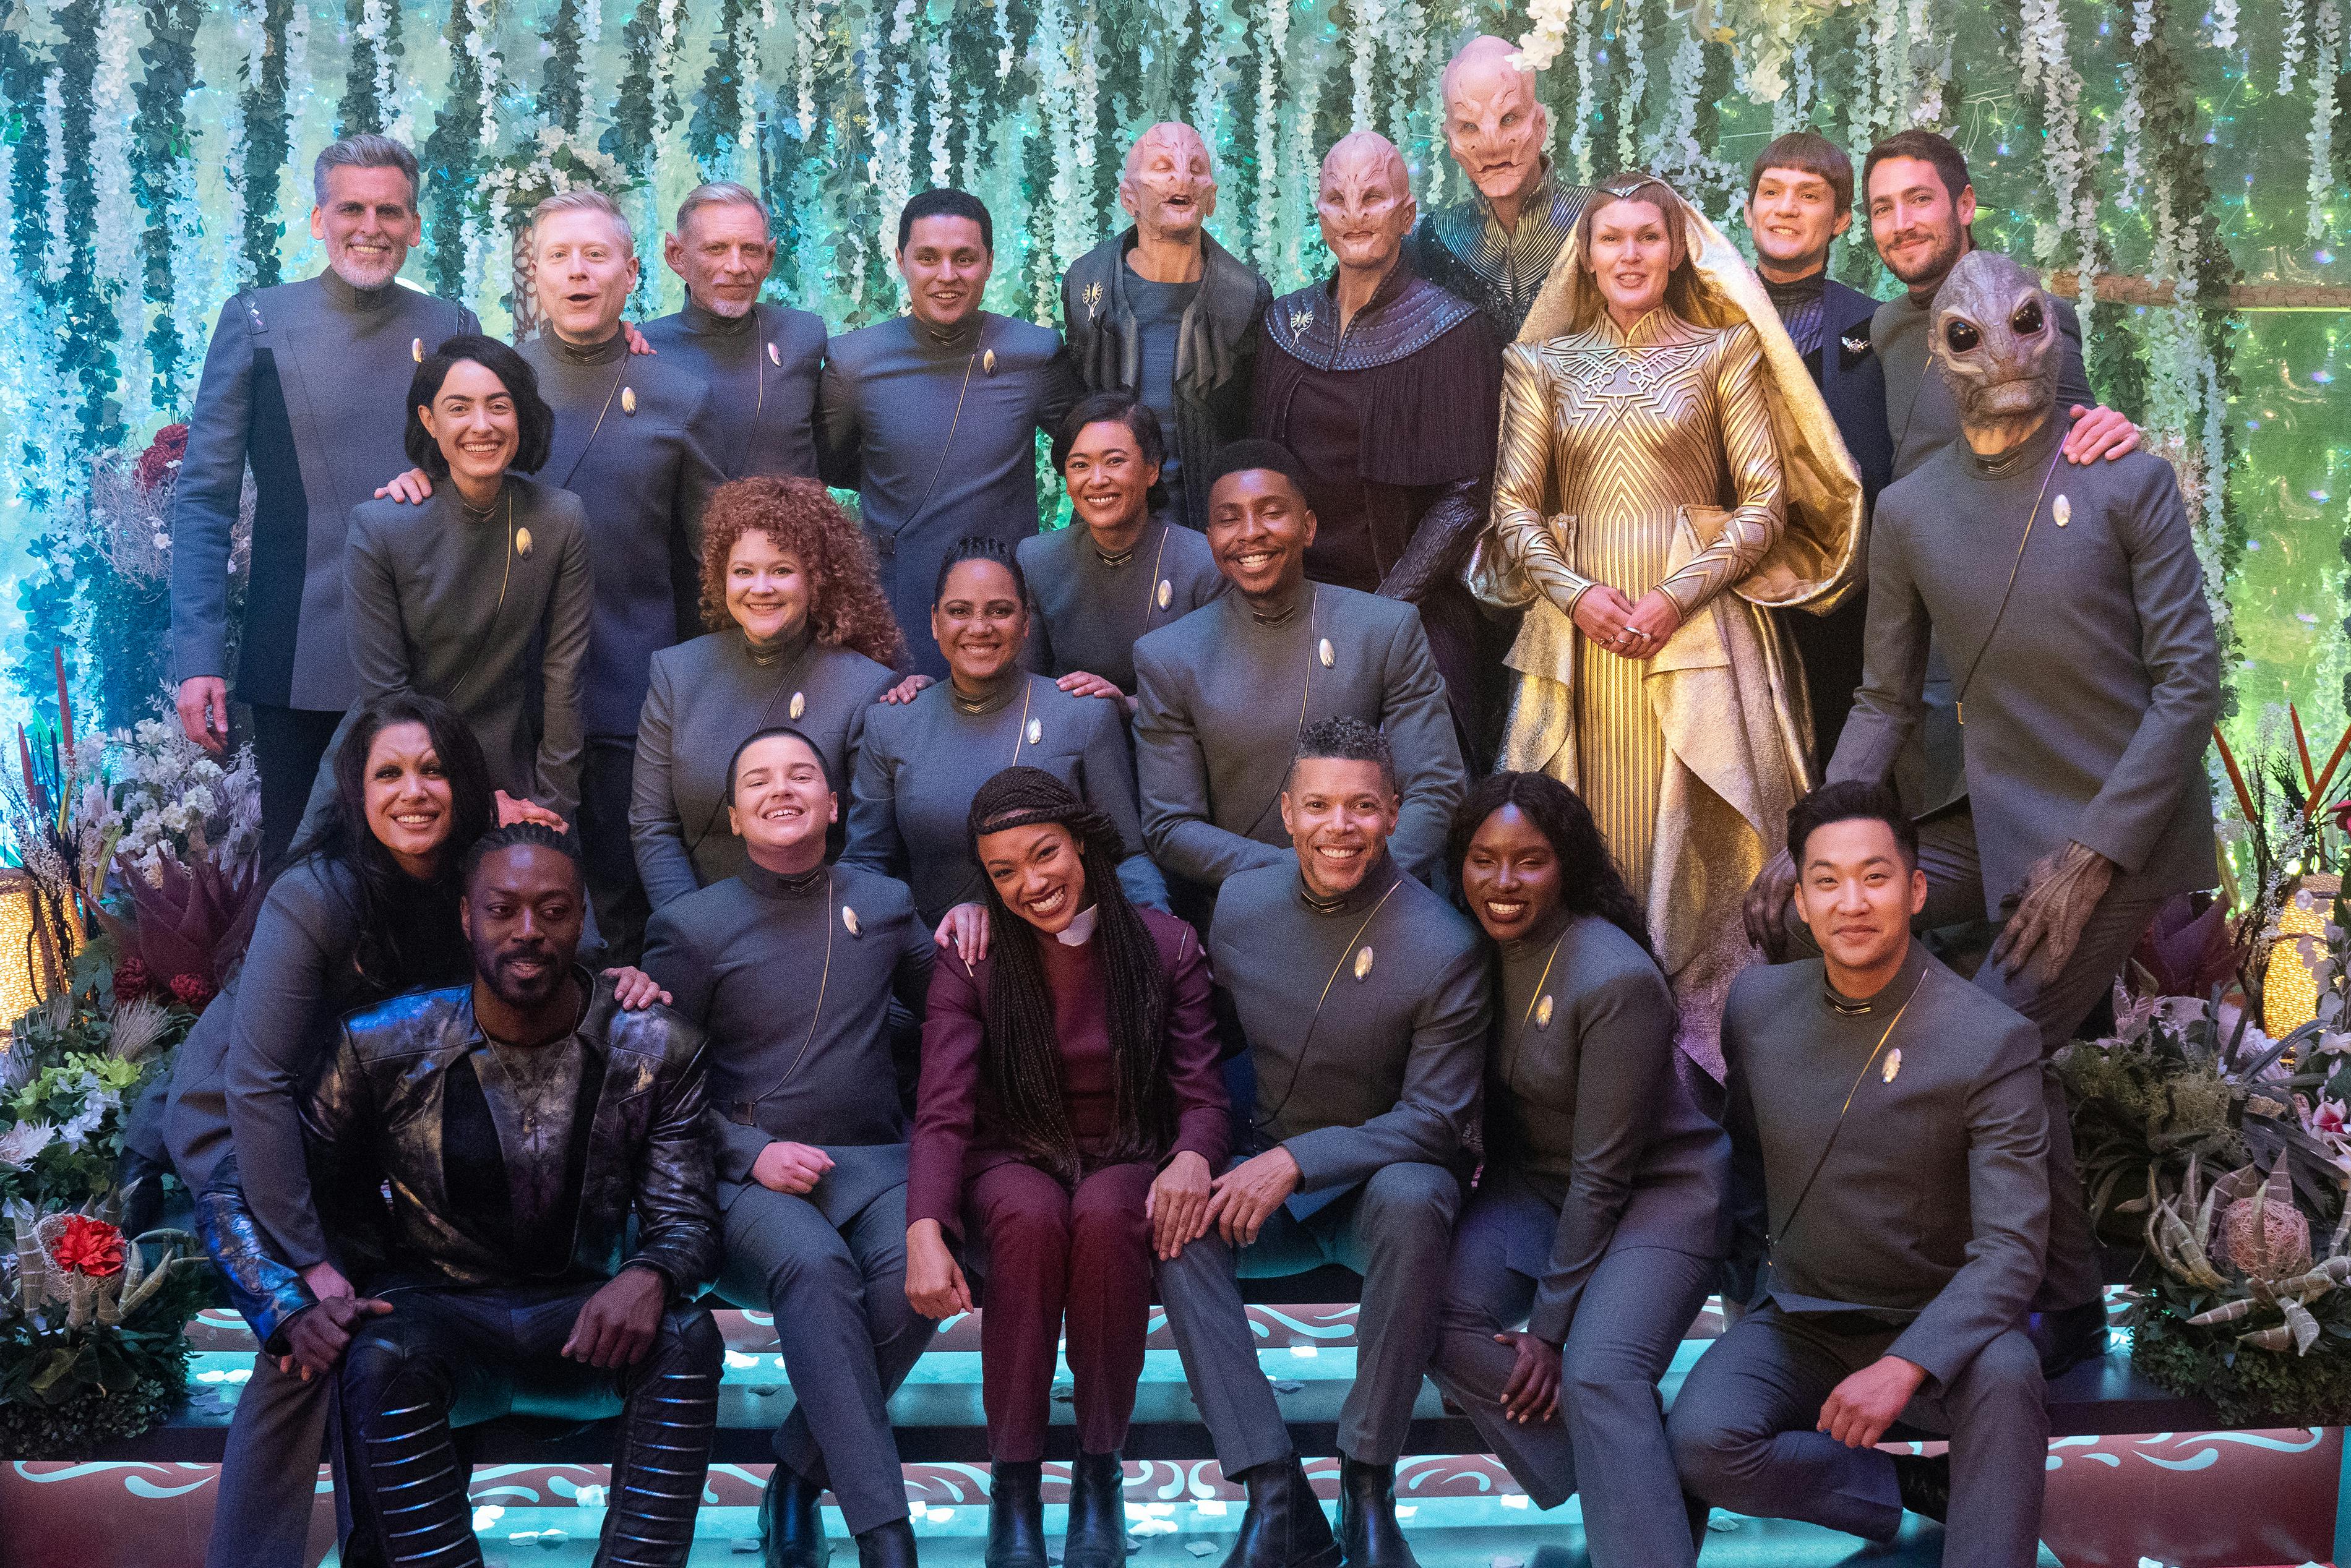 Behind-the-scenes of Saru and T'Rina's wedding in 'Life, Itself' with the crew of Discovery and Federation HQ posing in a group photo